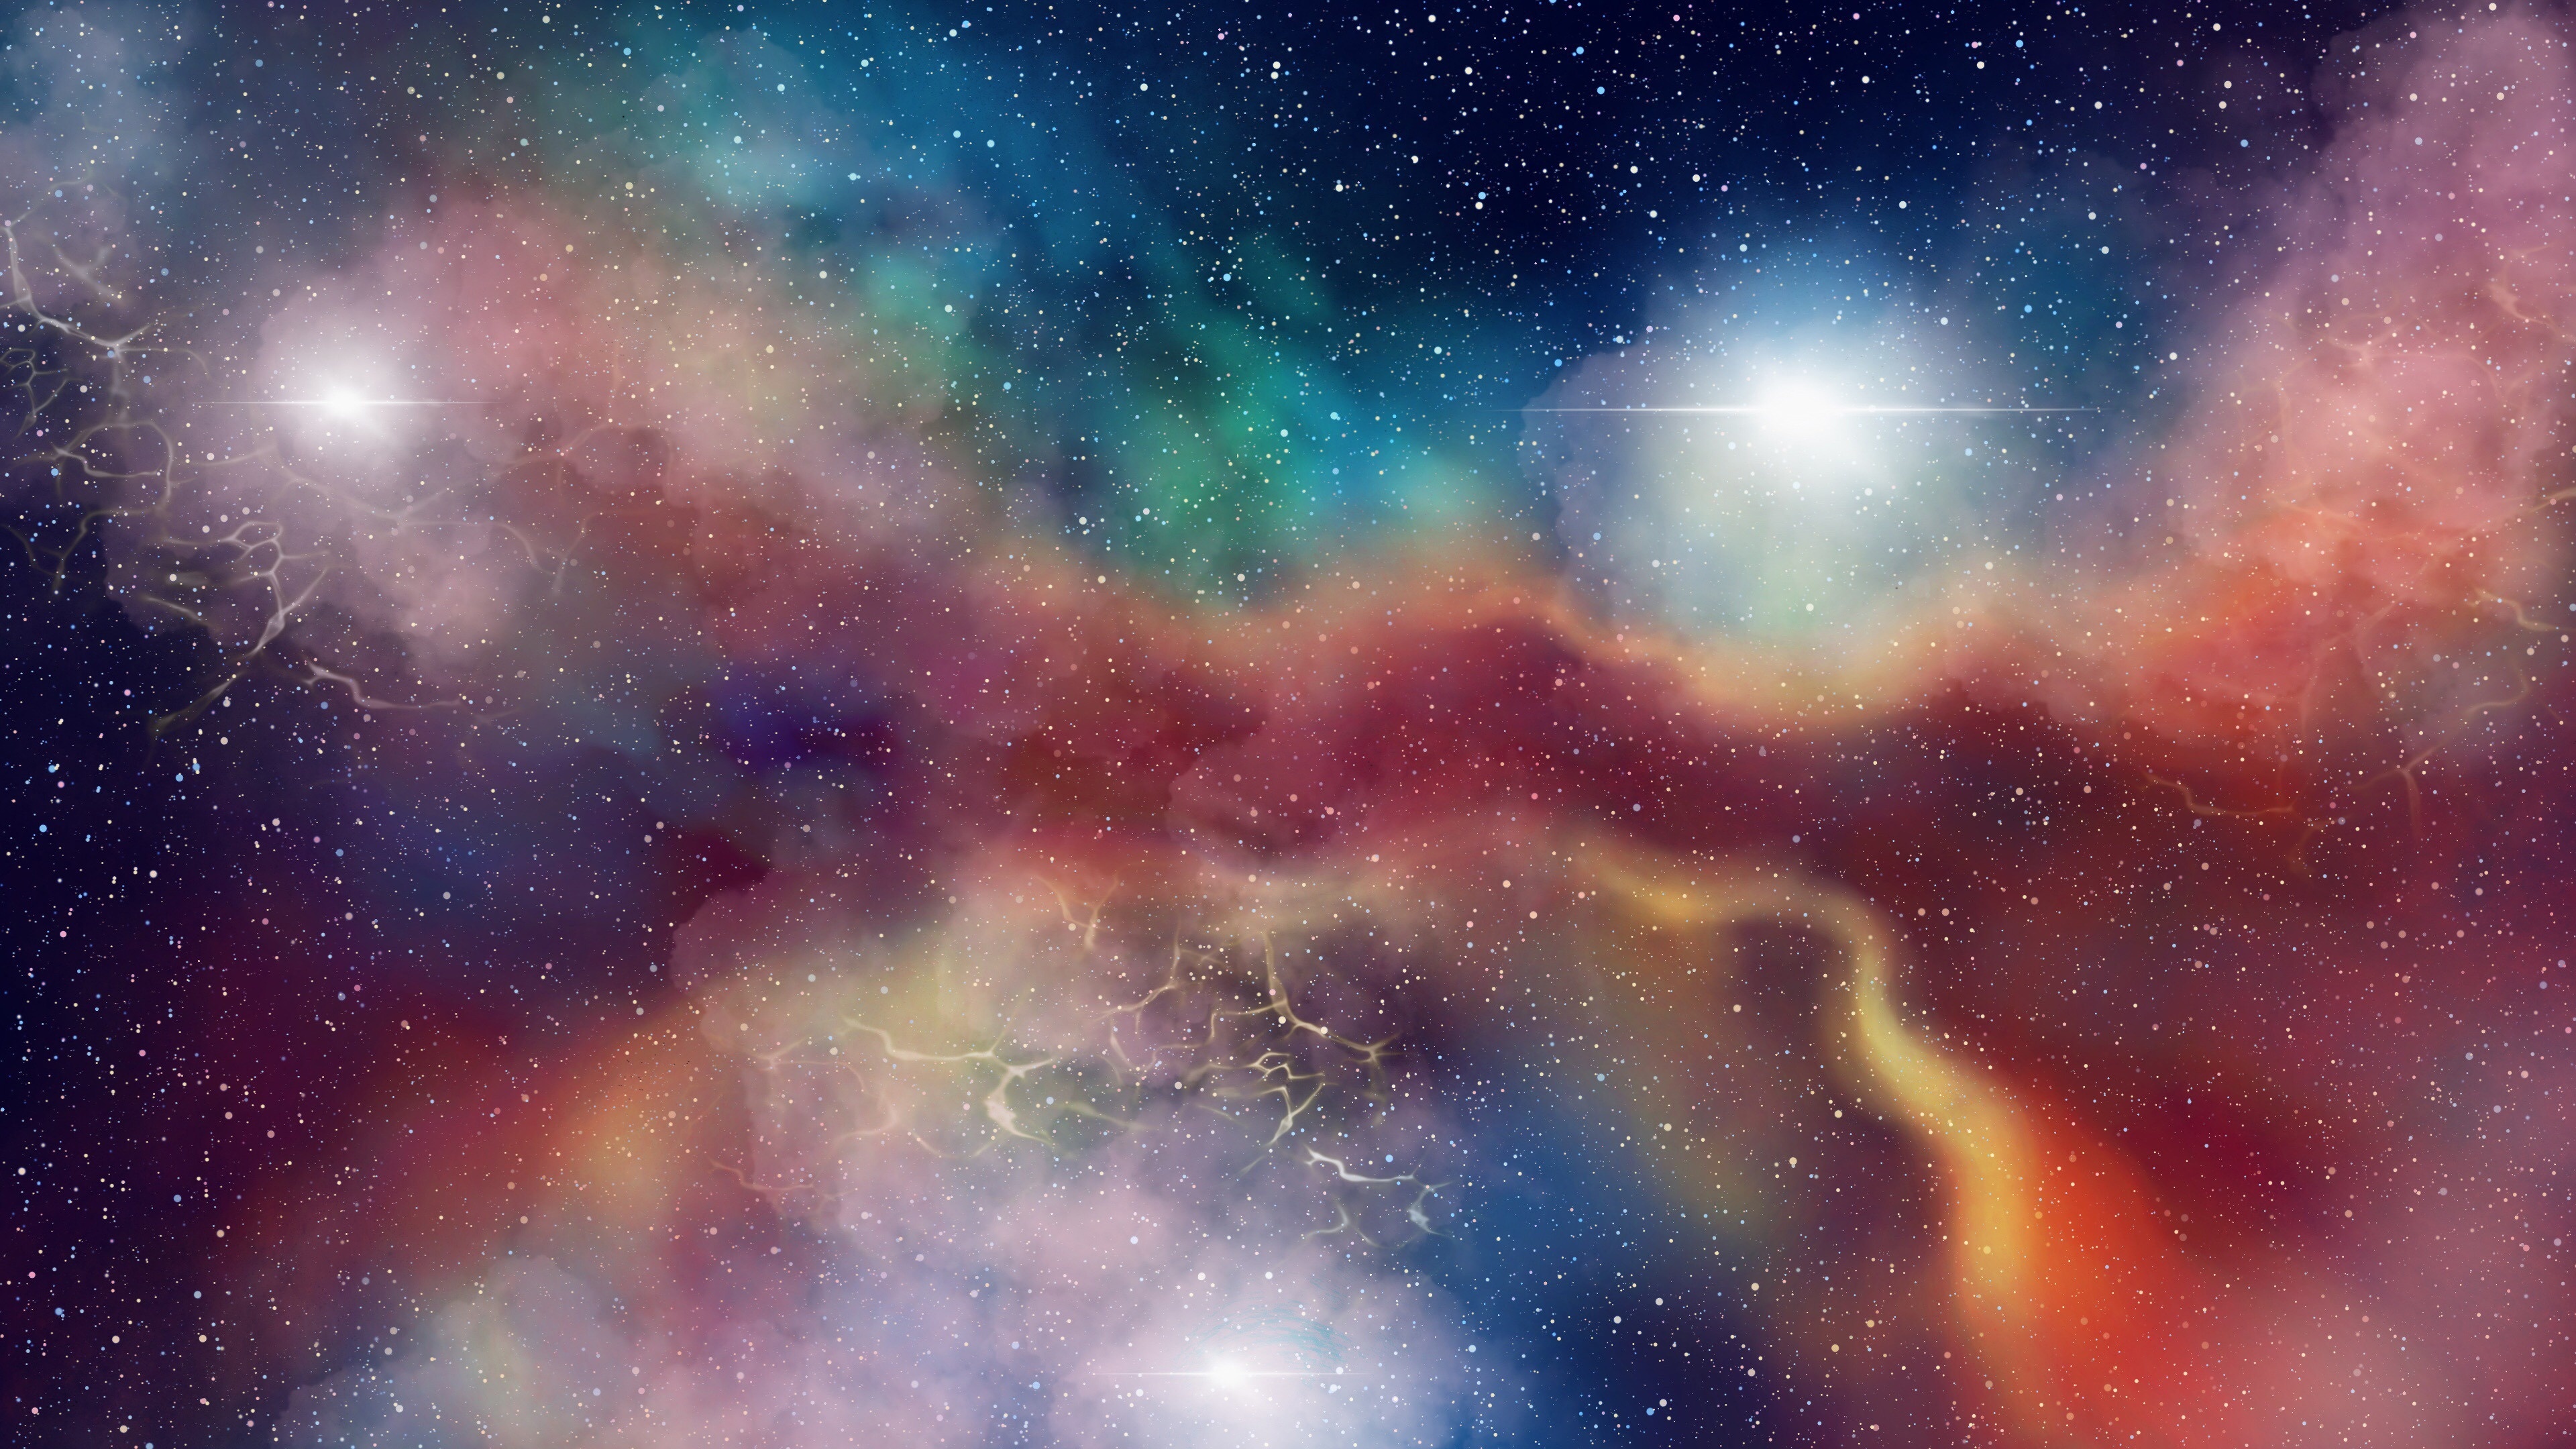 Download 3840x2400 Wallpaper Galaxy Stars Clouds Space